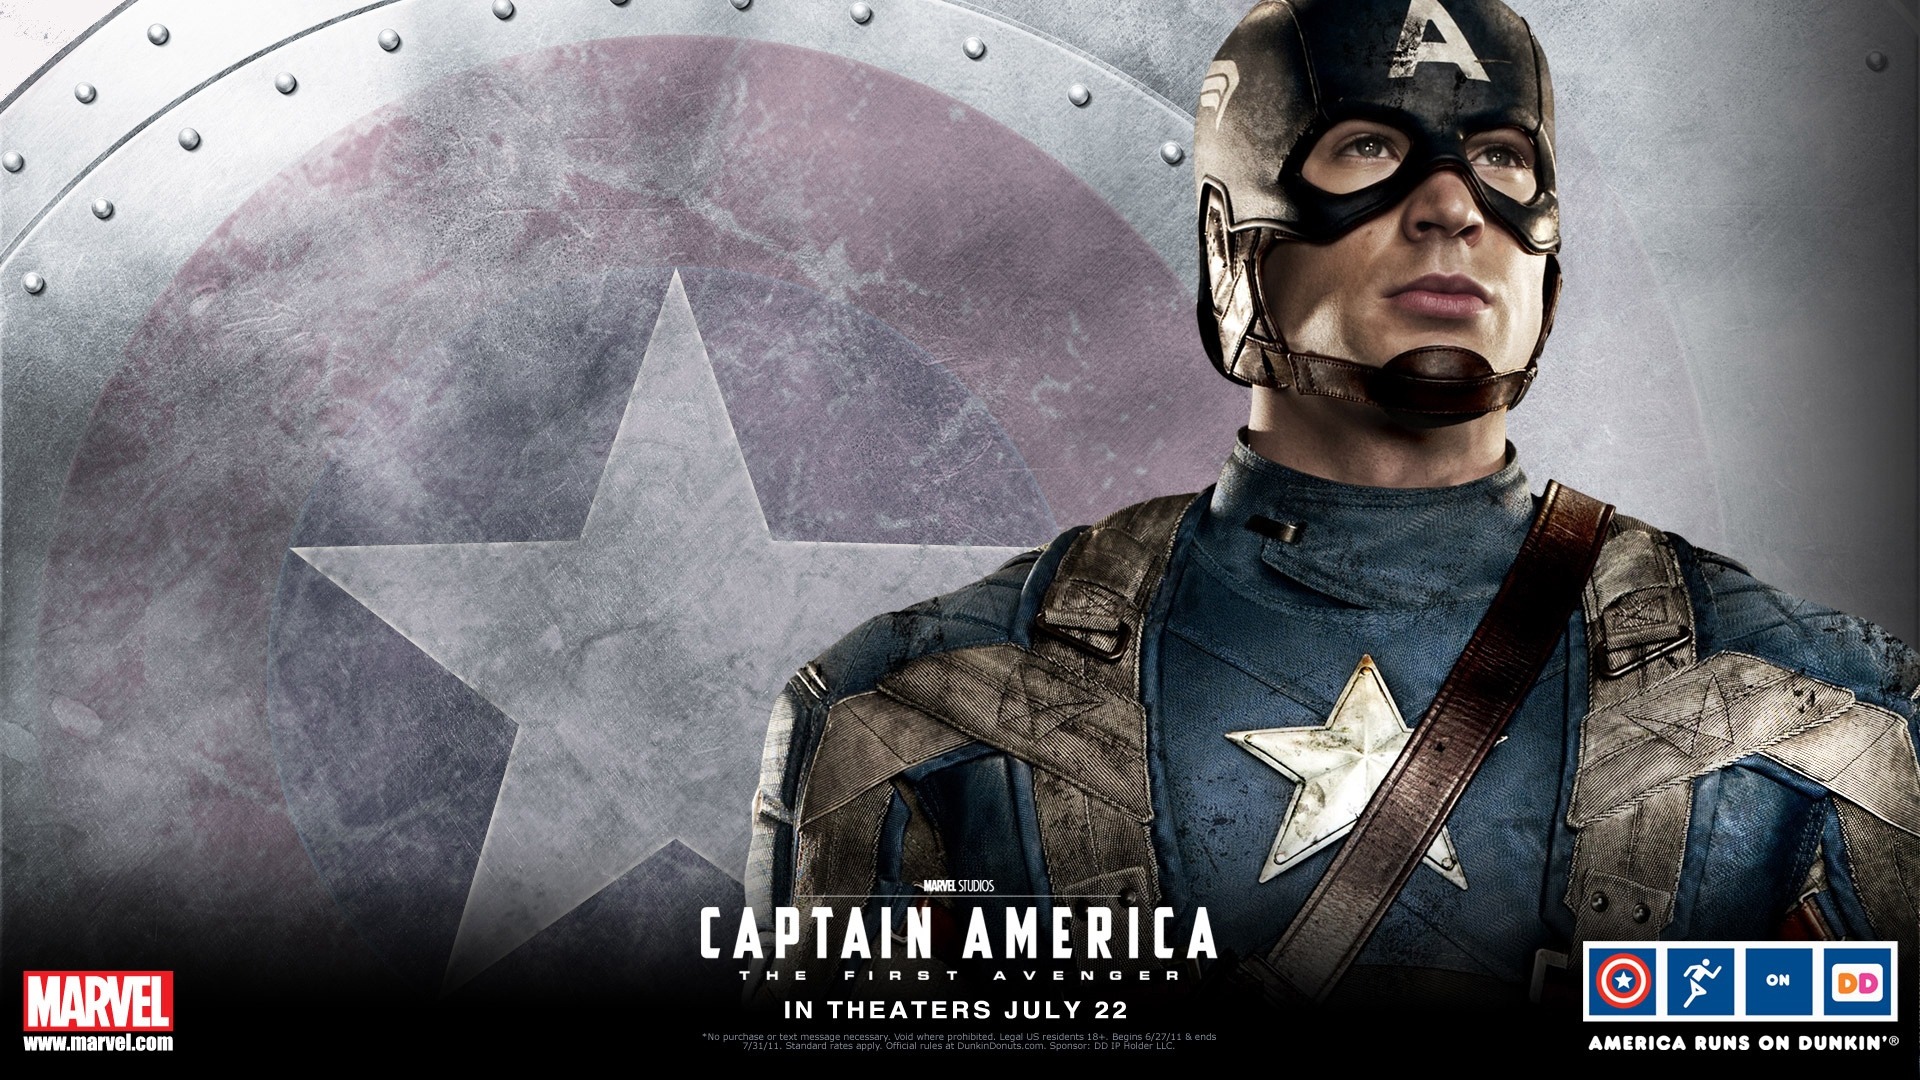 Captain America: The First Avenger wallpapers HD #5 - 1920x1080